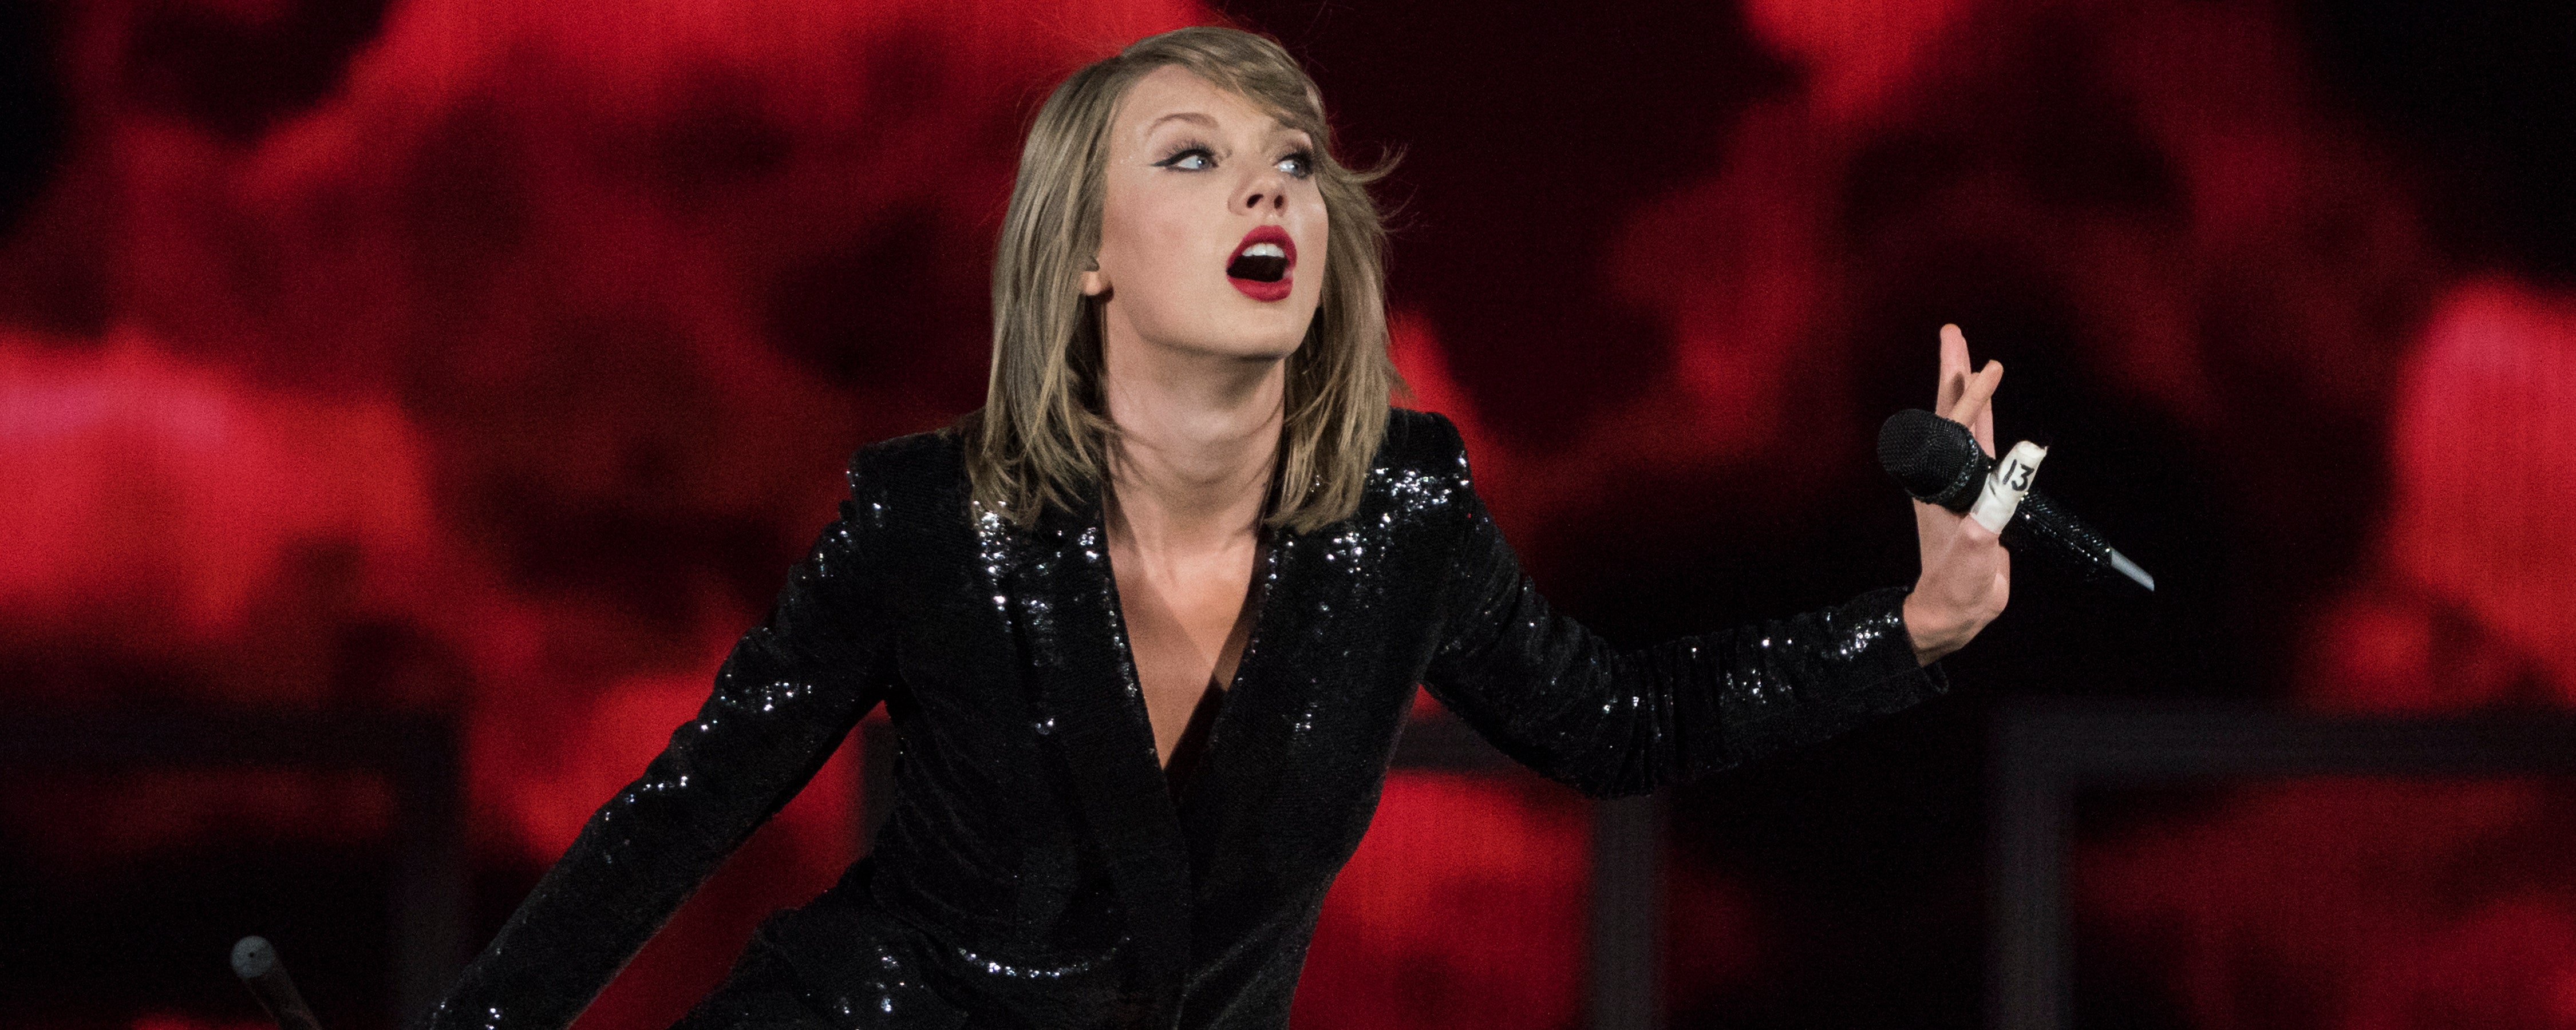 Taylor Swift Instagrams Bad Blood Pun After Kitchen Mishap